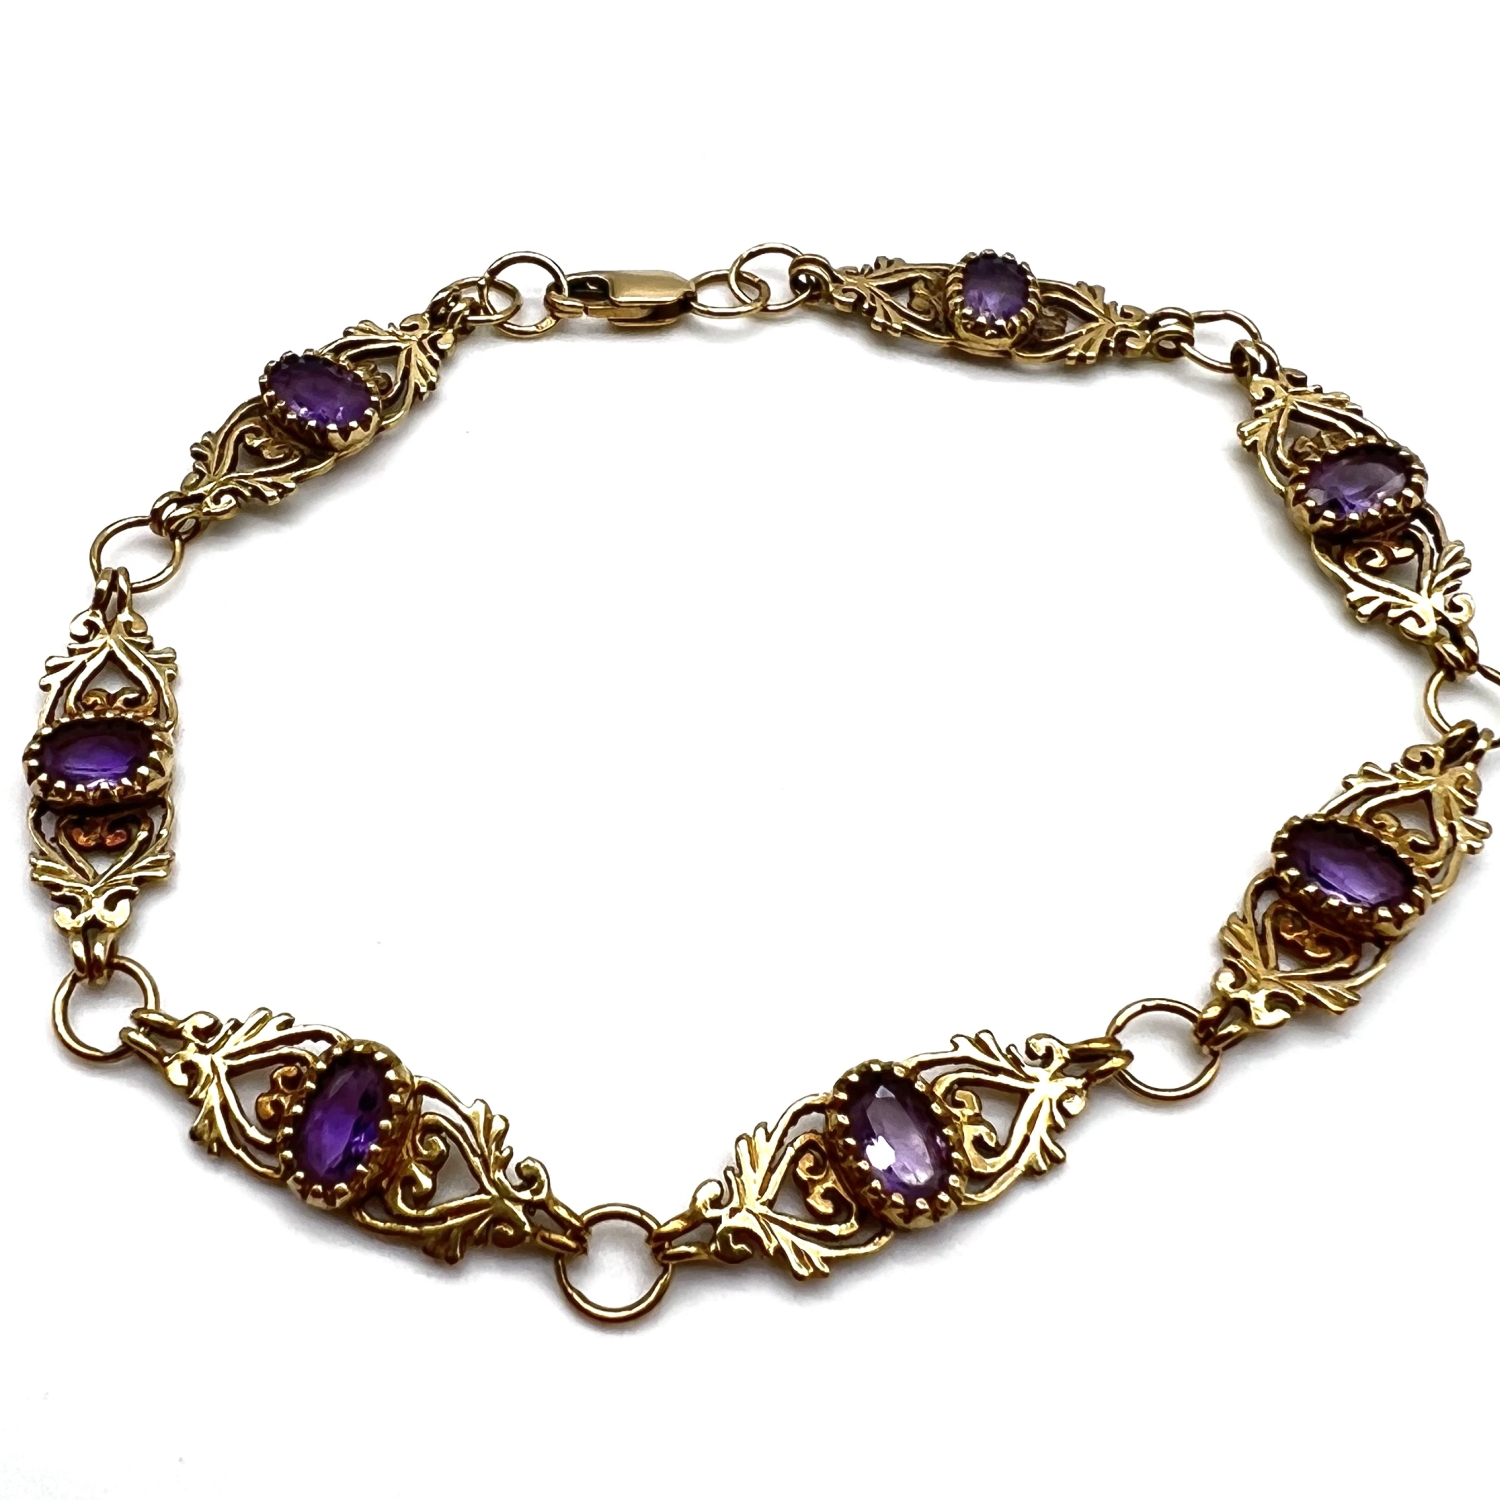 Fine 9ct gold and amethyst bracelet. Marked for 9ct gold and set with amethyst stones. Measures 19.